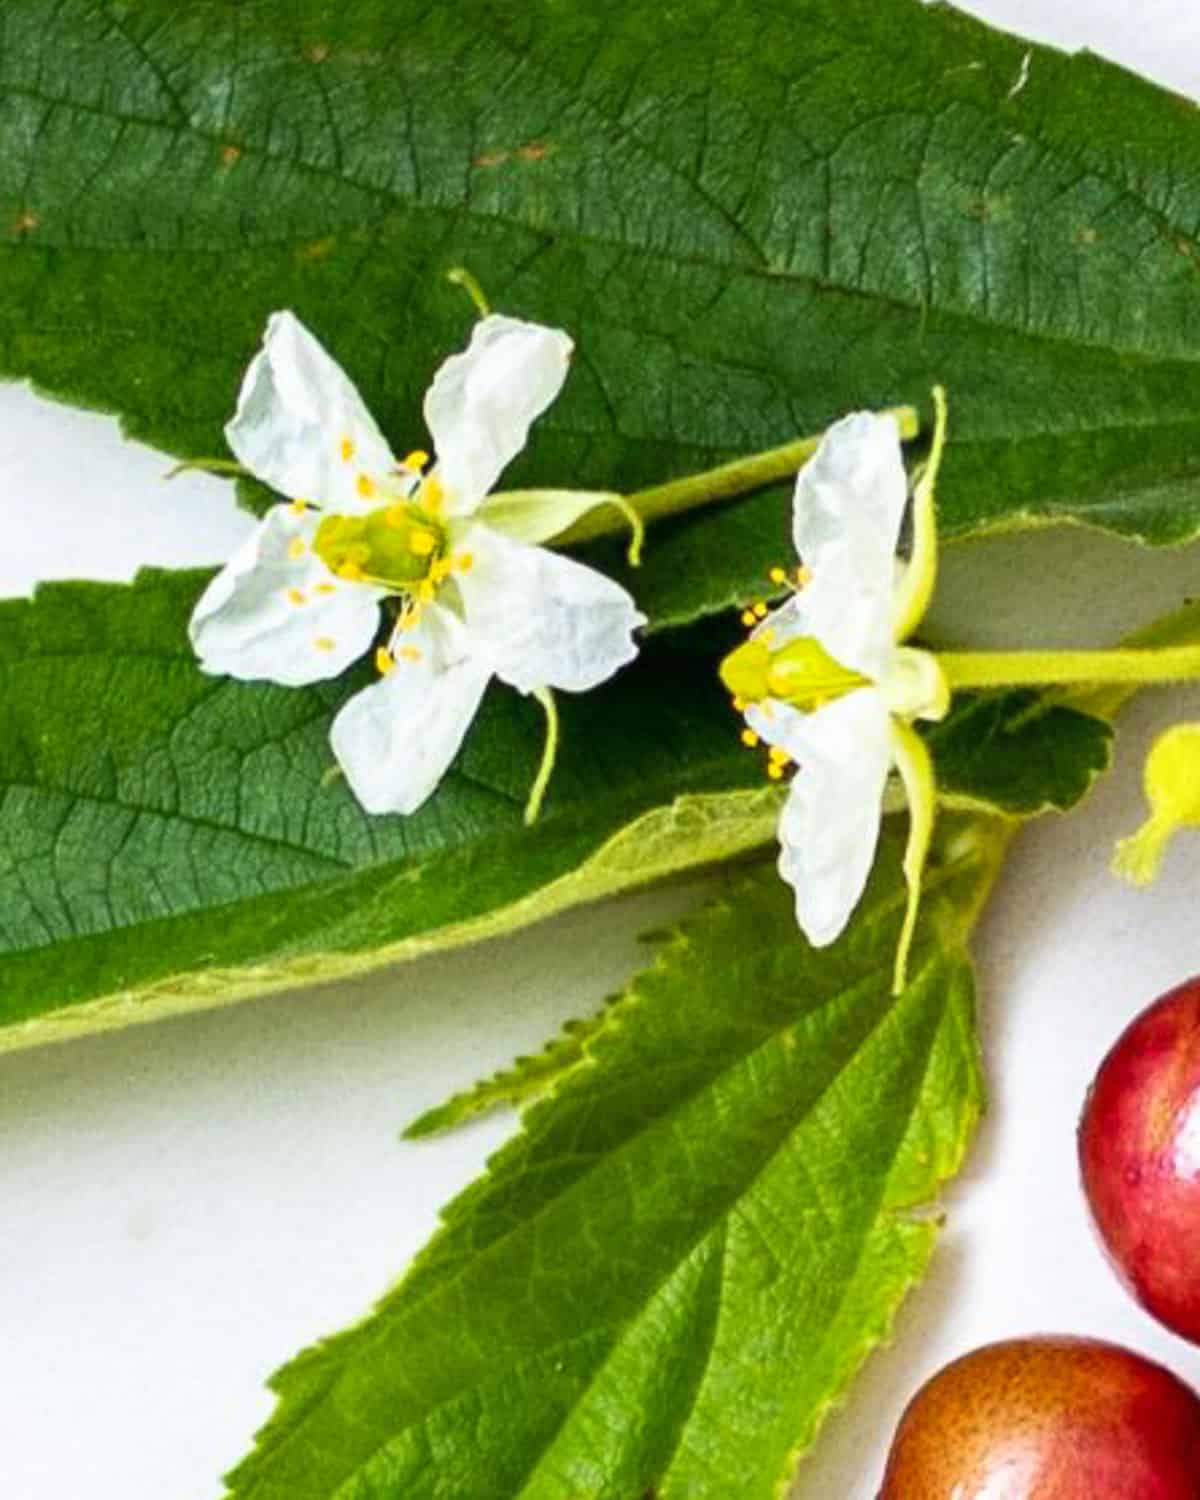 Two delicate white flowers on a branch with green leaves and red fruit.